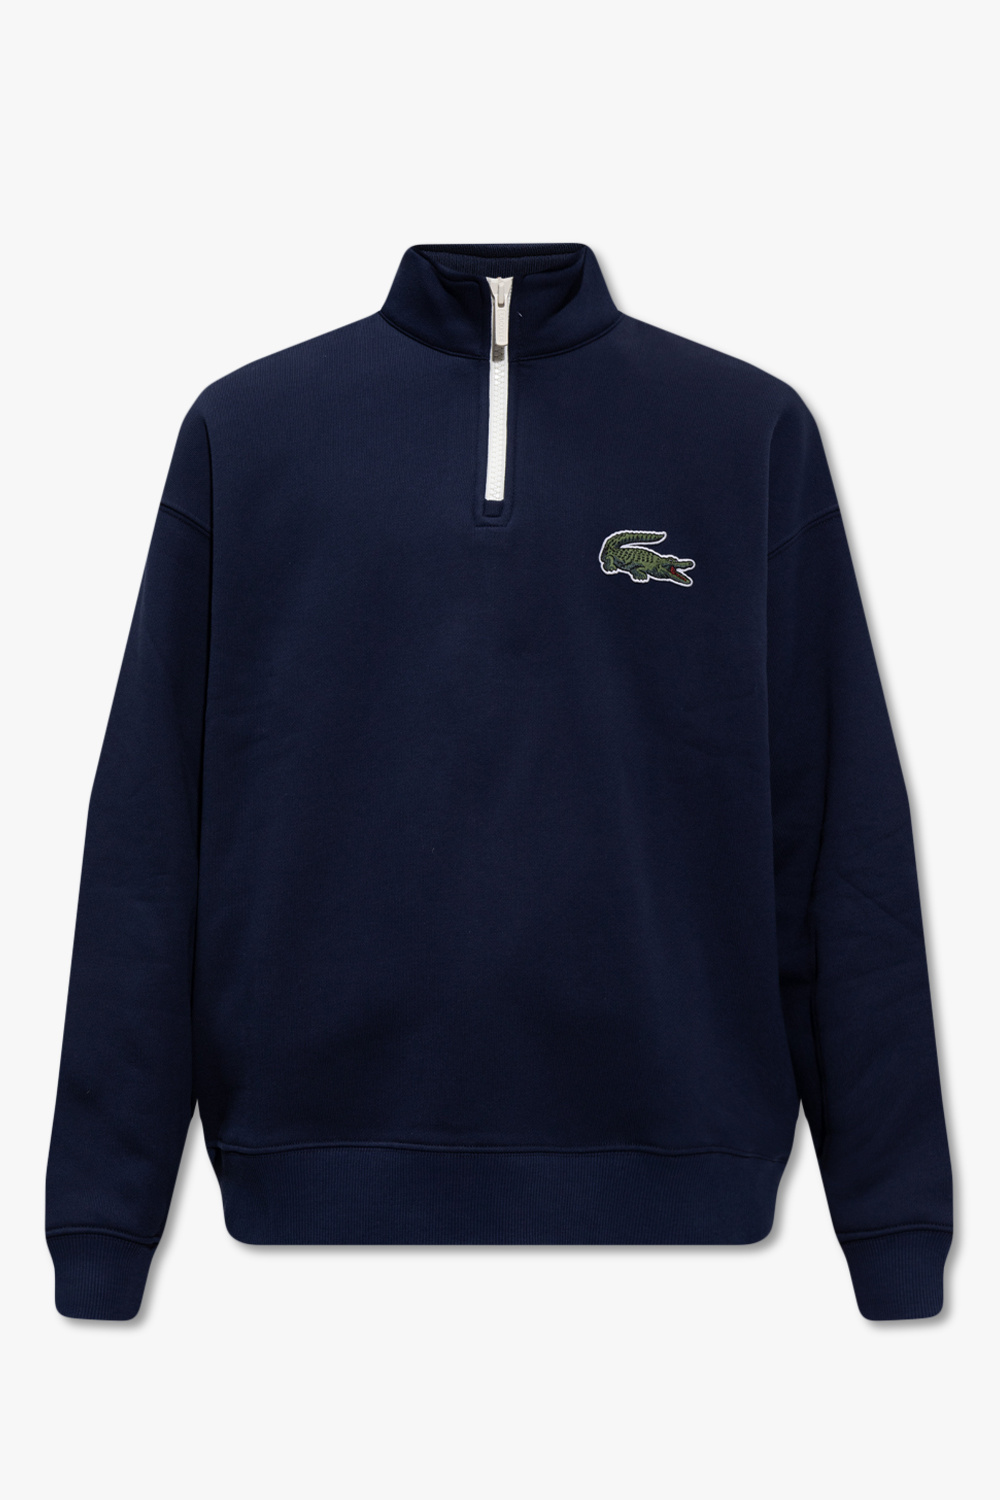 lacoste 7-41SUI0012B53 Sweatshirt with high neck